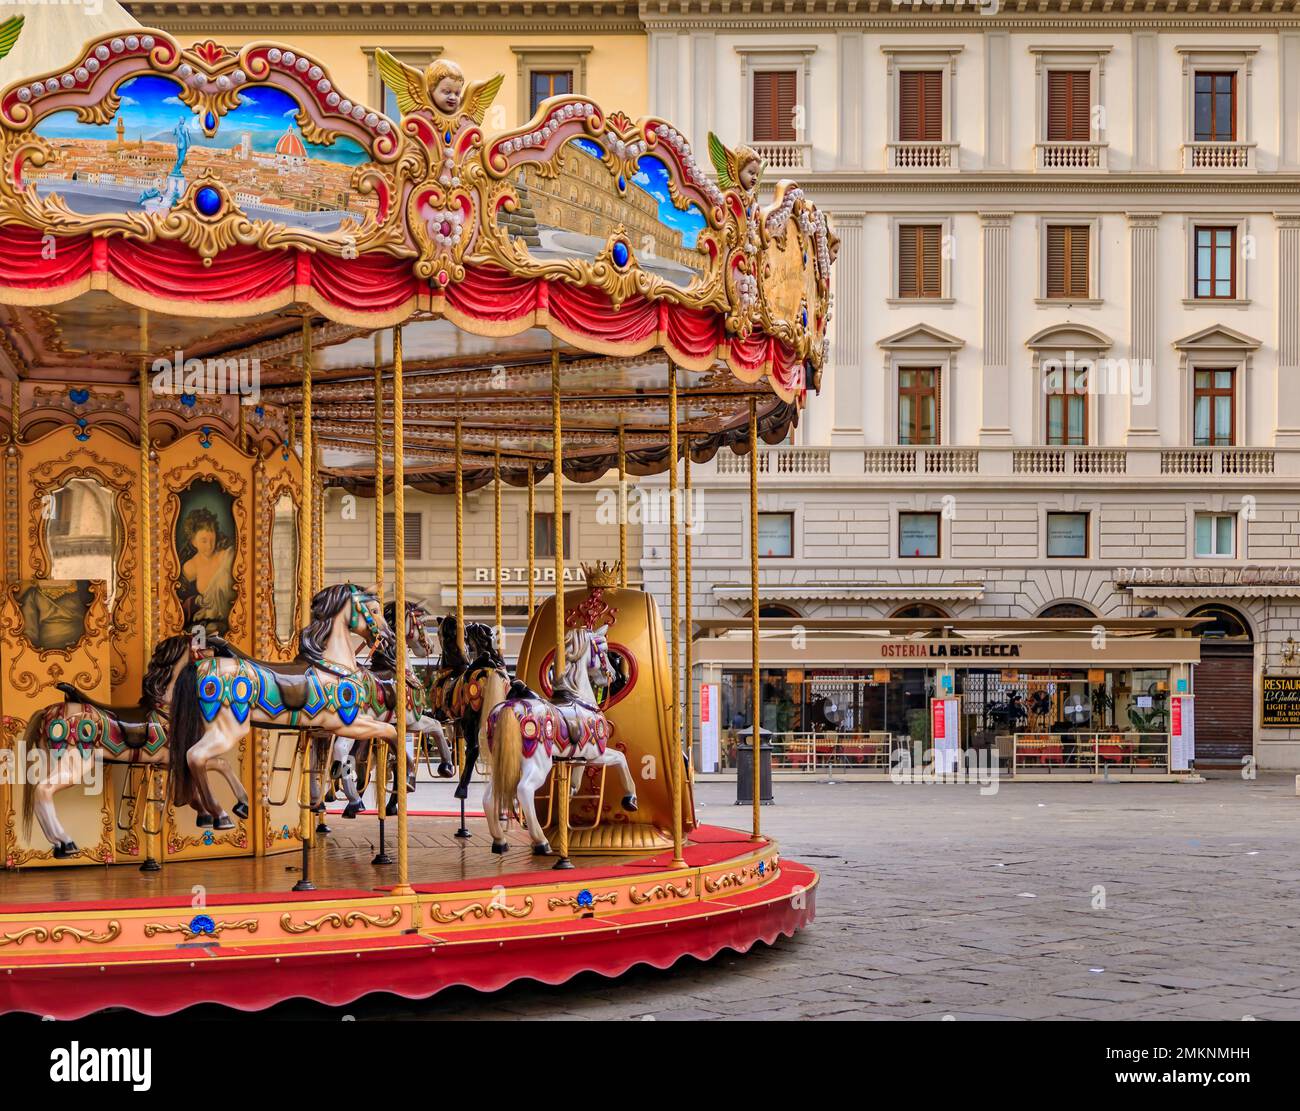 Florence, Italy - June 04, 2022: Ornate antique carousel with wooden horses on Piazza della Republica during the day Stock Photo